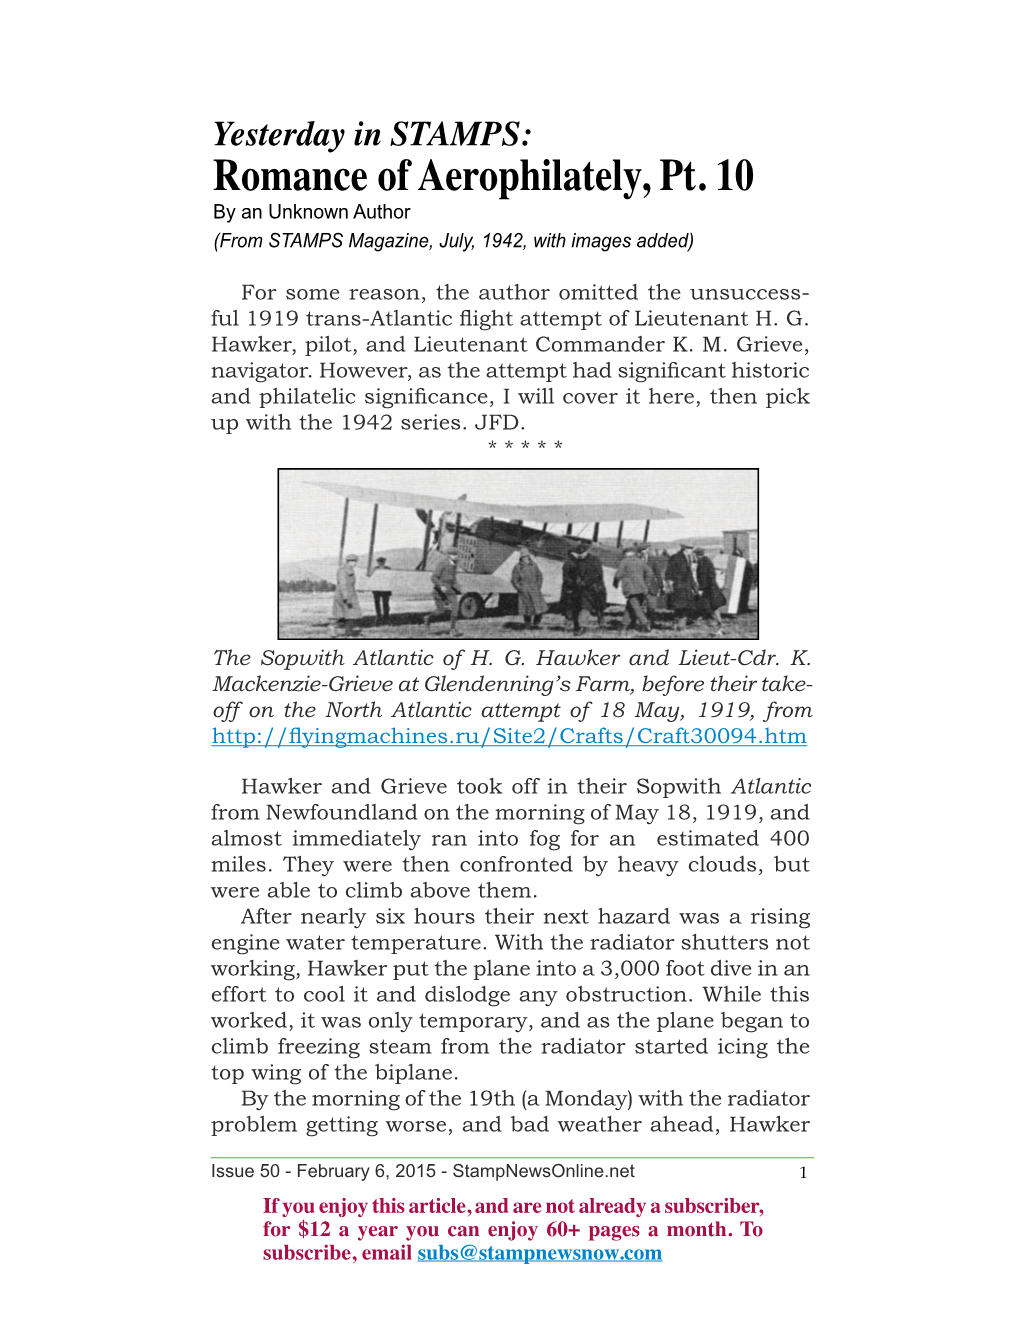 Romance of Aerophilately, Pt. 10 by an Unknown Author (From STAMPS Magazine, July, 1942, with Images Added)